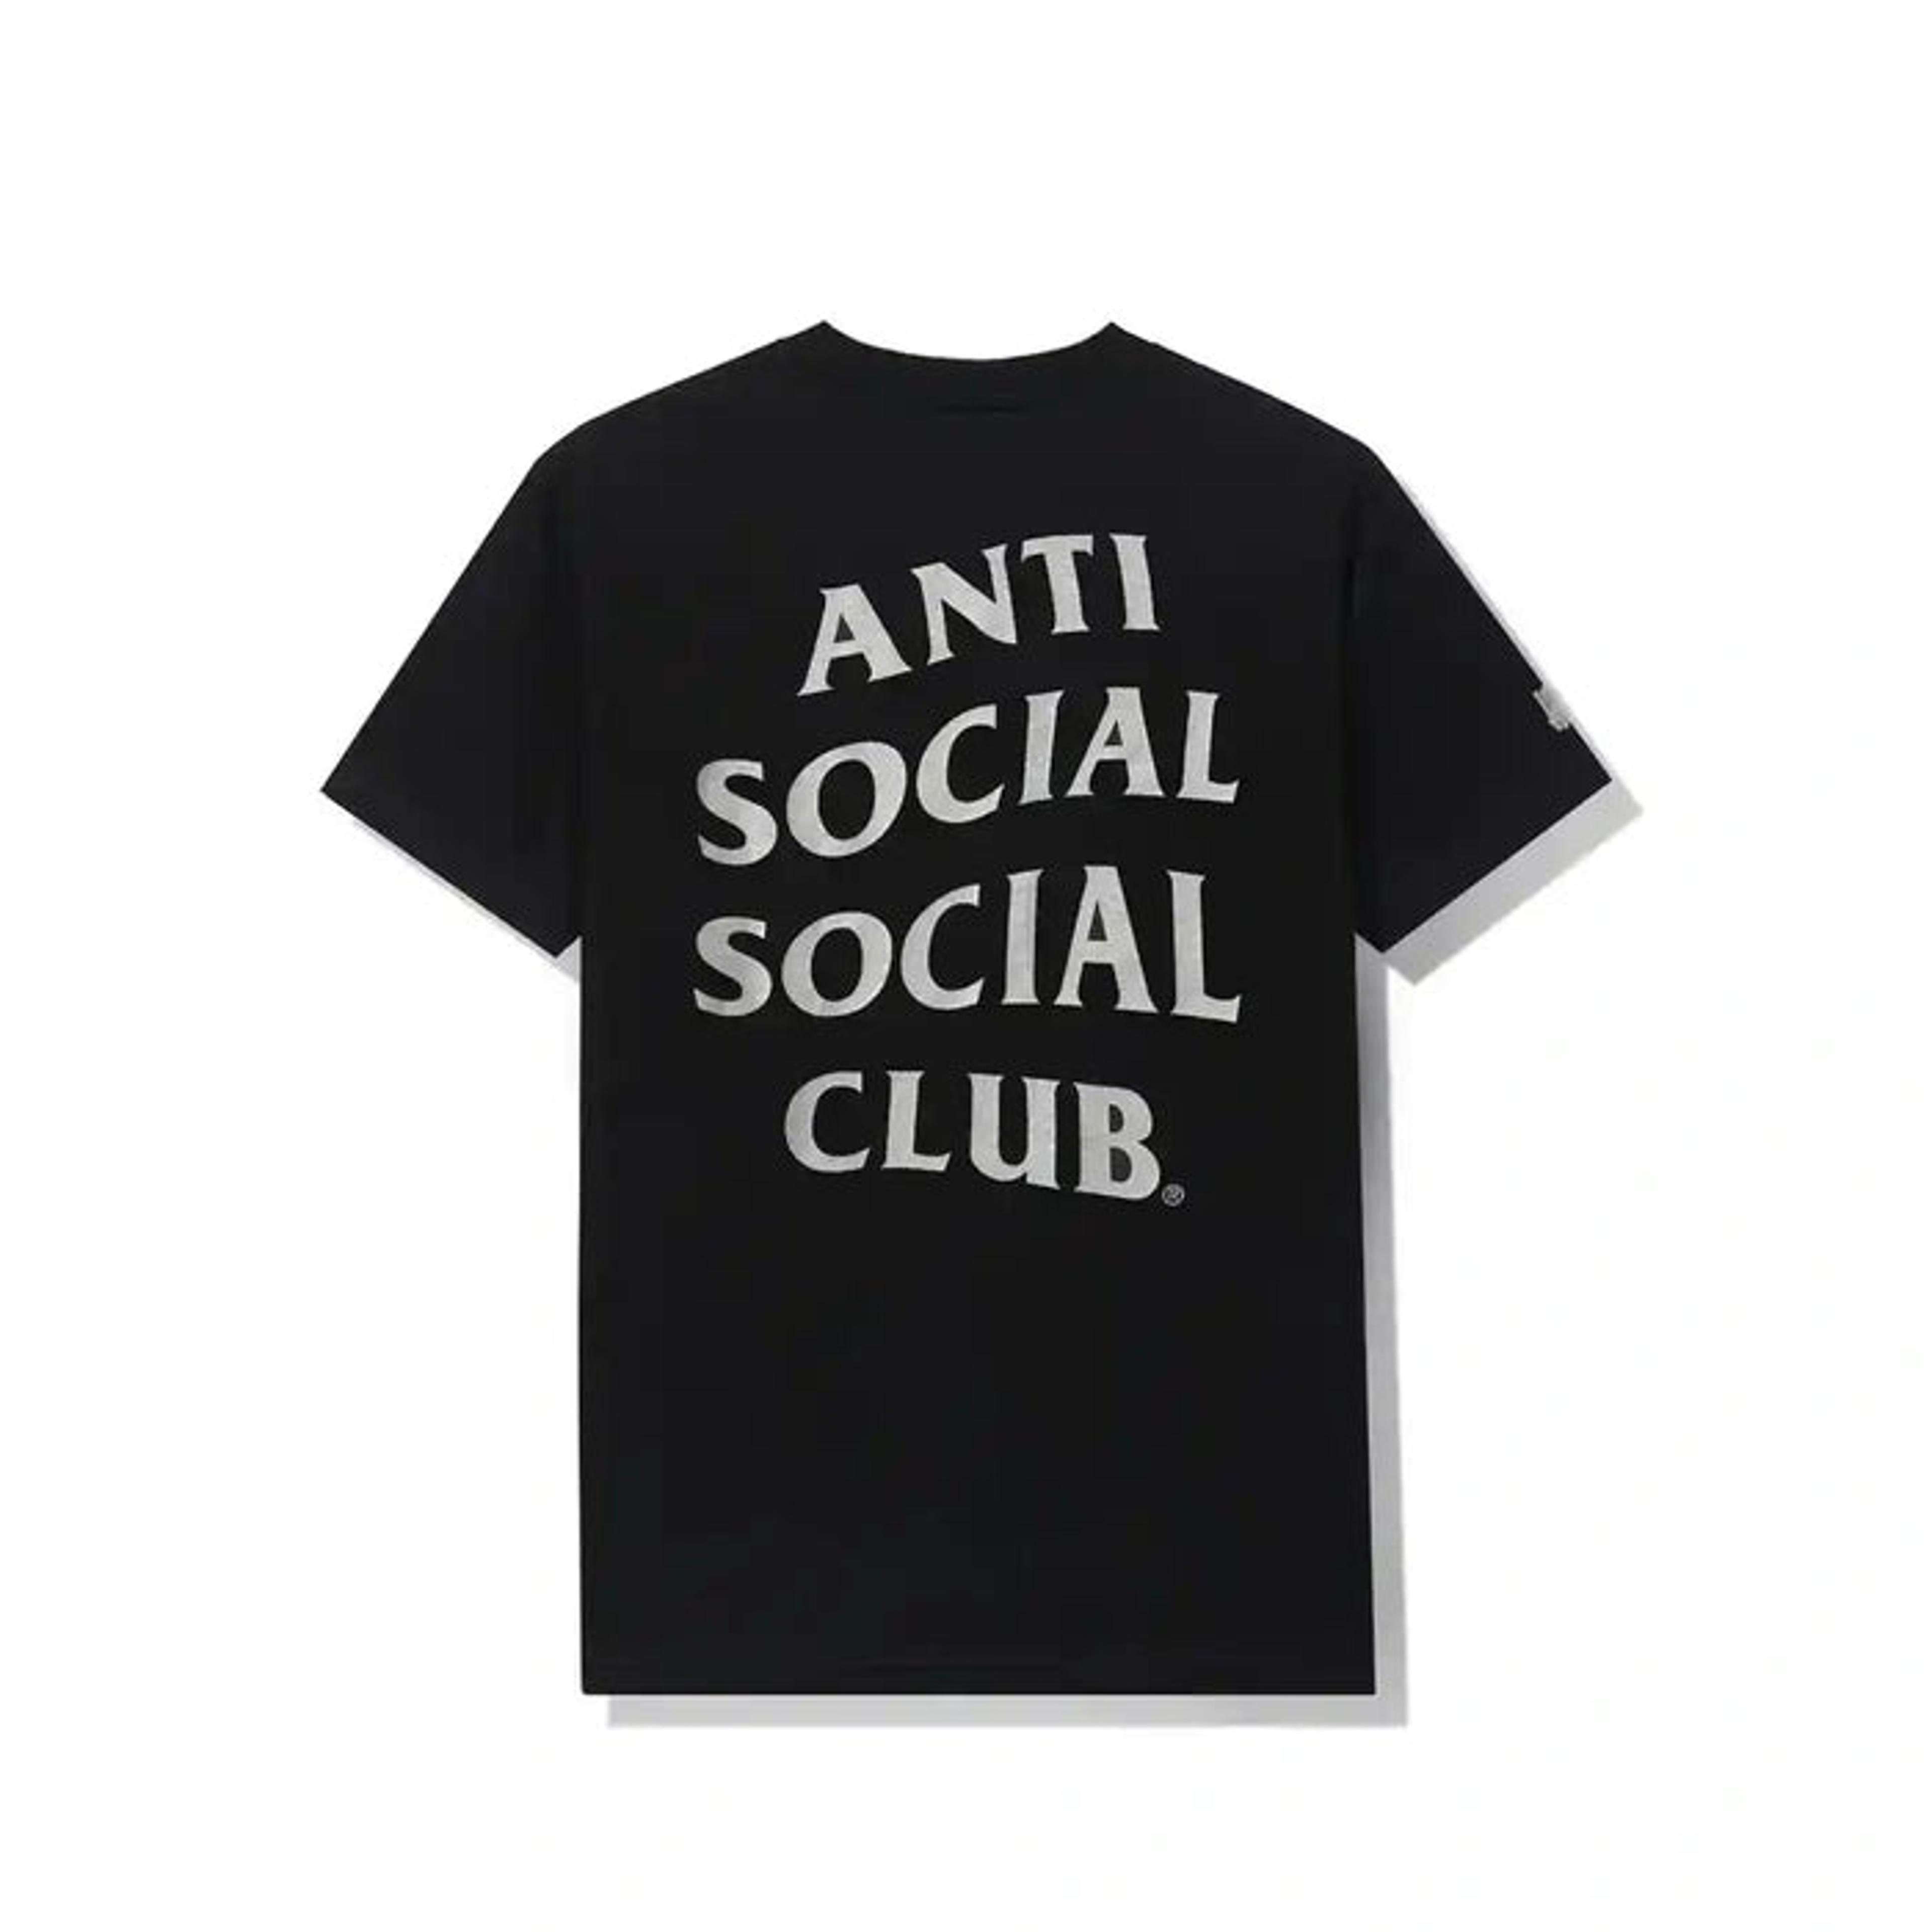 Alternate View 2 of Anti Social Social Club X Undefeated Paranoid Black Tee ASSC DS 